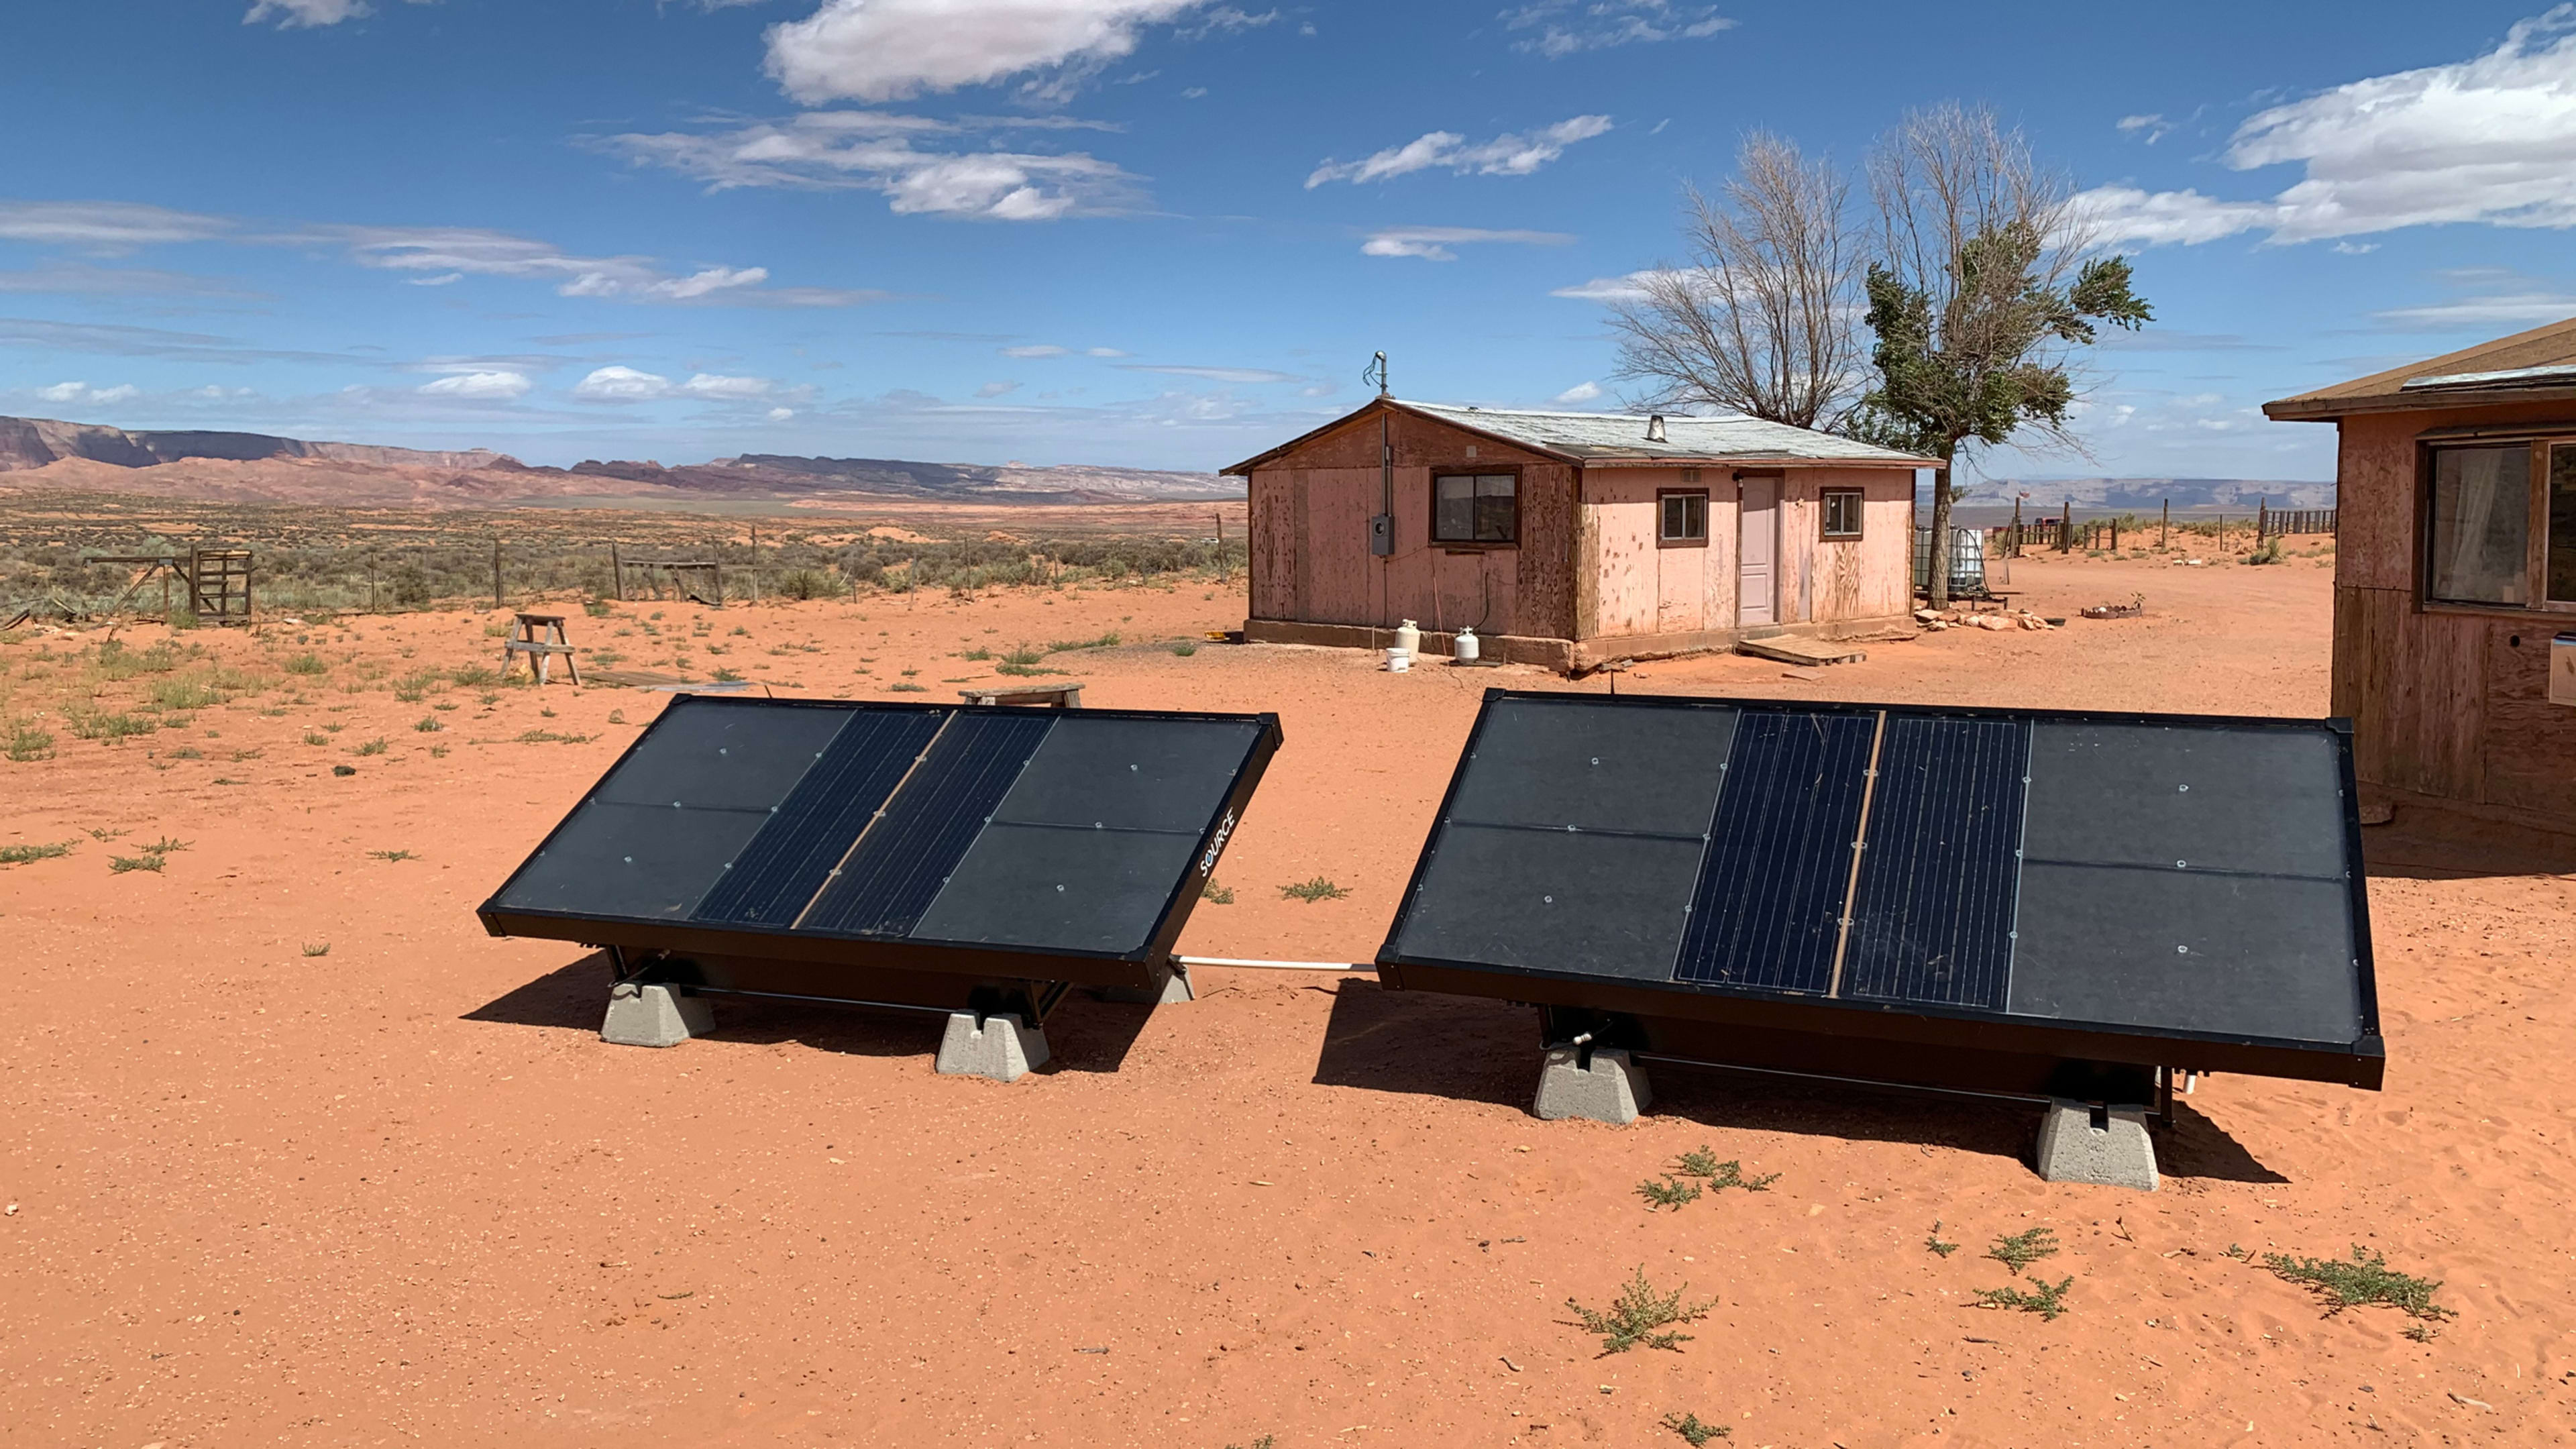 This tech is bringing water to Navajo Nation by pulling it out of the air